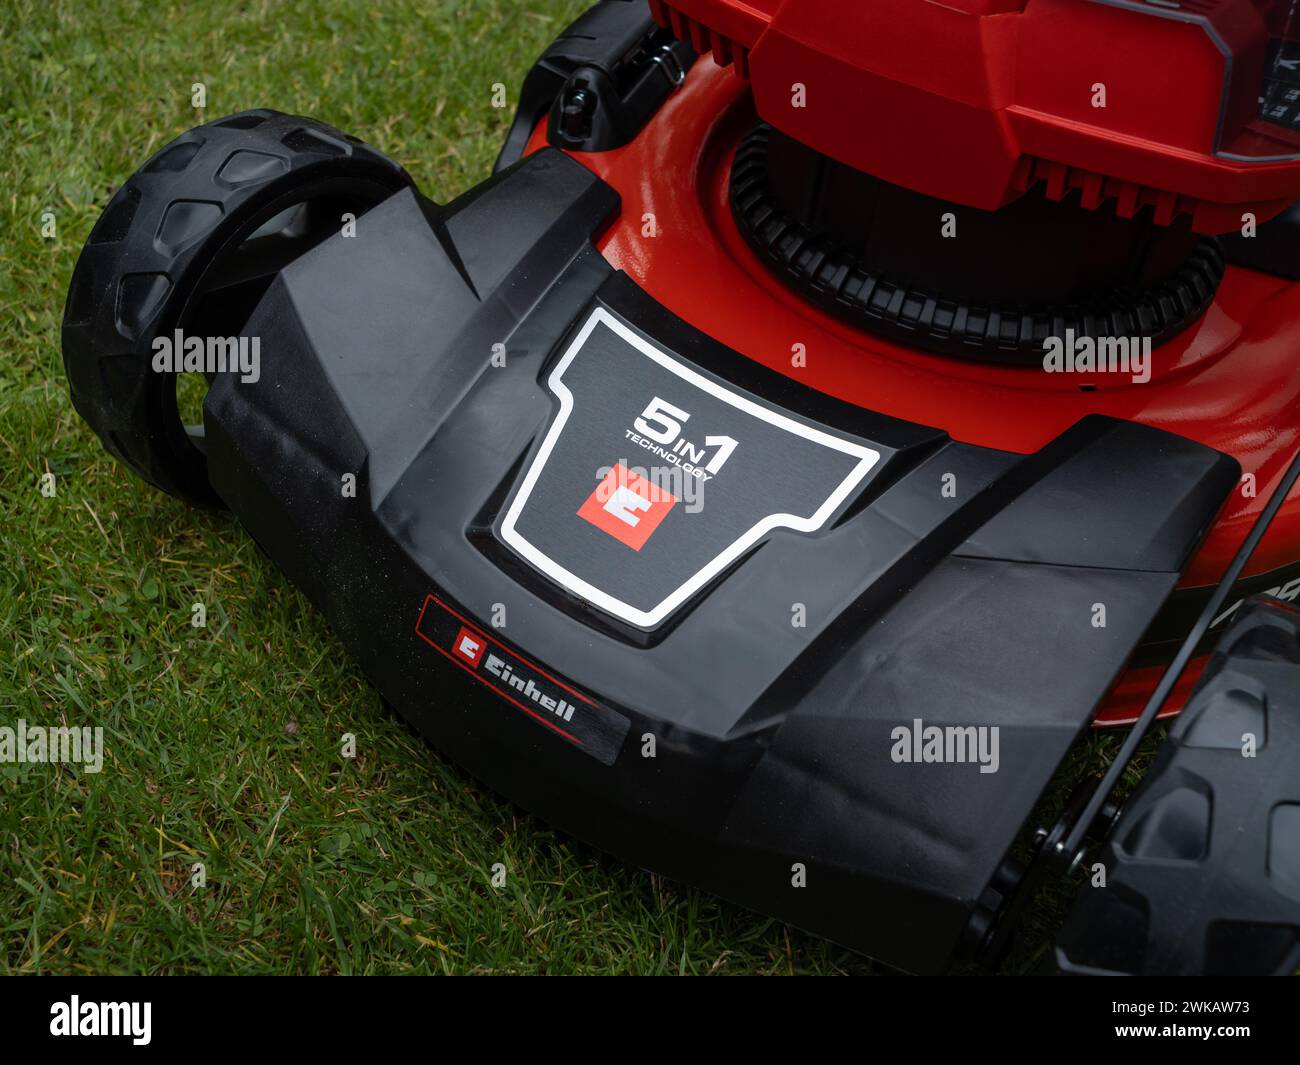 Einhell cordless lawn mower GP-CM 36 47 S HW Li. Close up of the front with the logo and the label 5 in 1 Technology. Red battery powered tool. Stock Photo